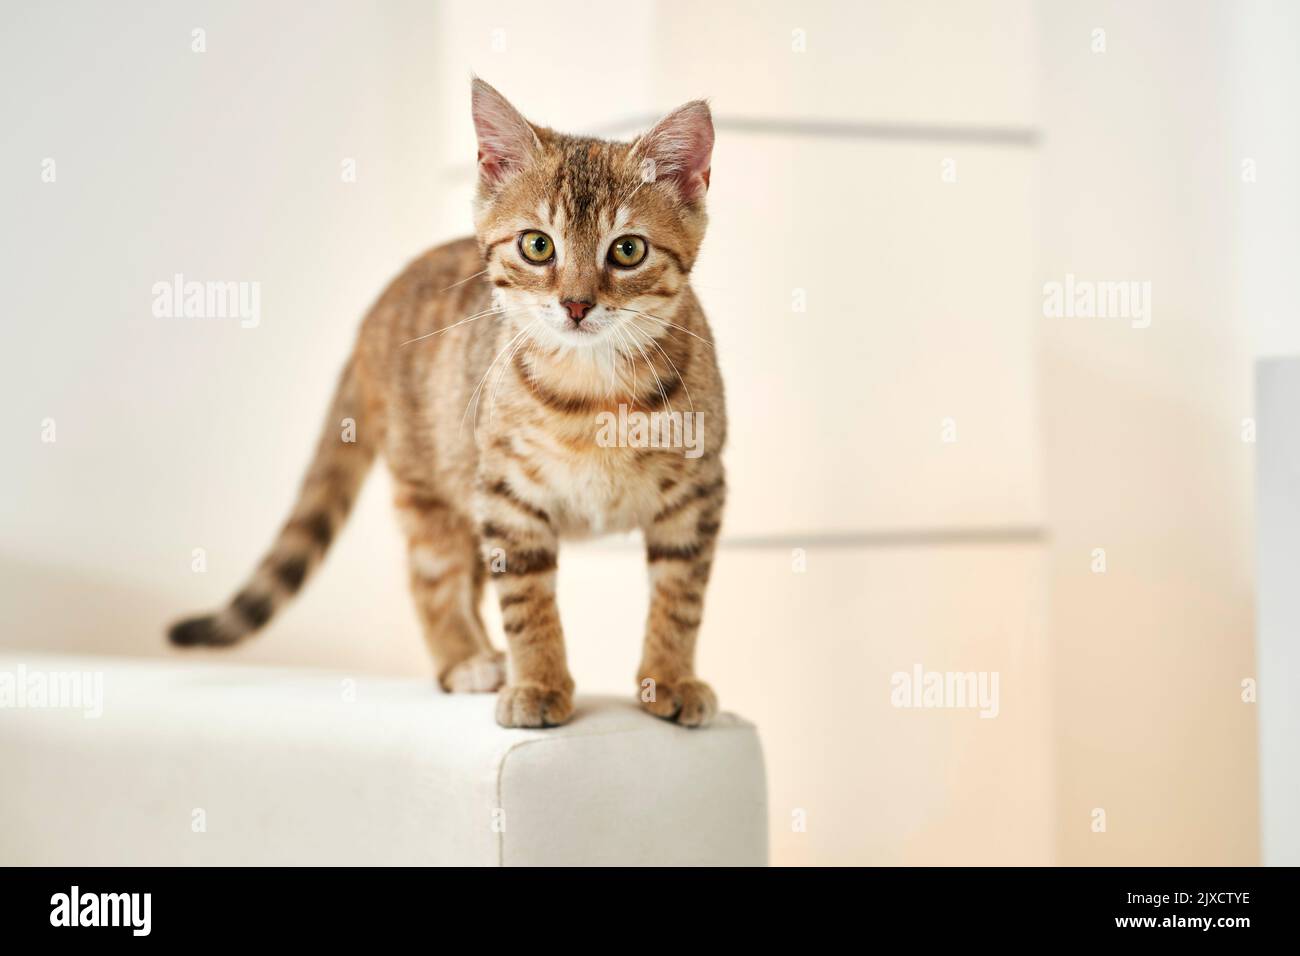 Domestic cat. Tabby kitten standing on a couch. Germany Stock Photo